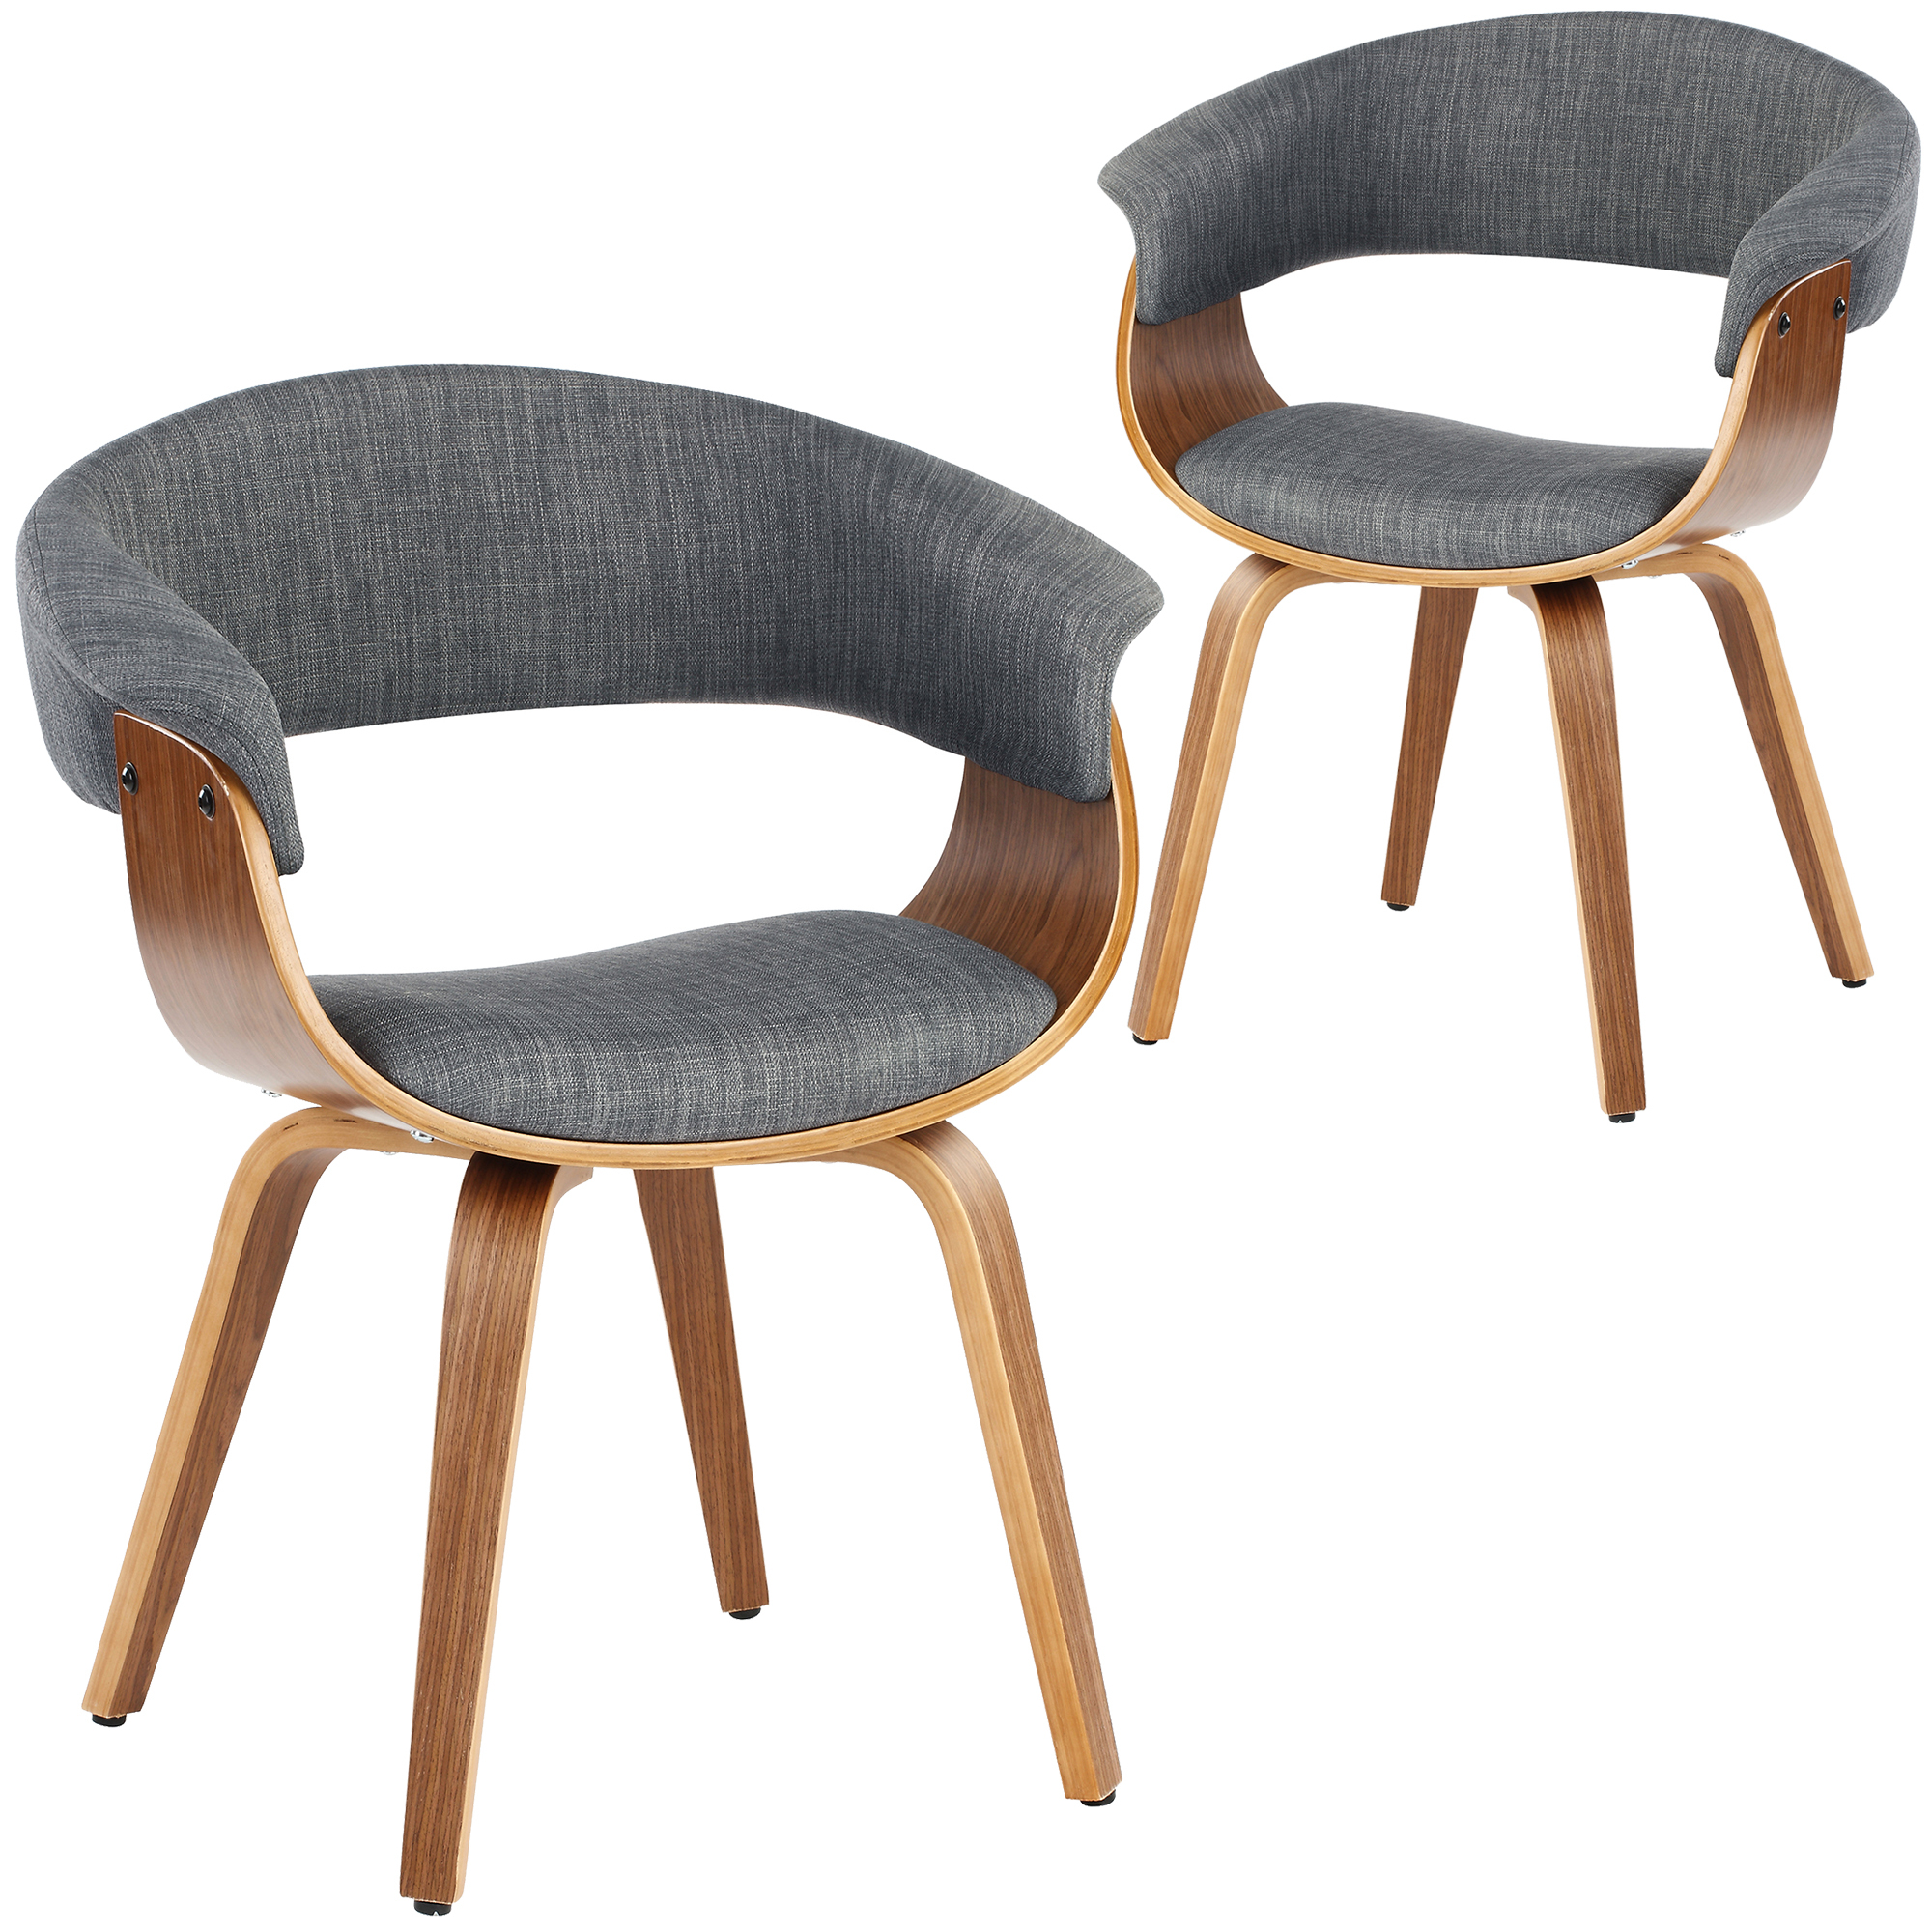 Temple Webster Bentwood Upholstered, Padded Wooden Dining Chairs